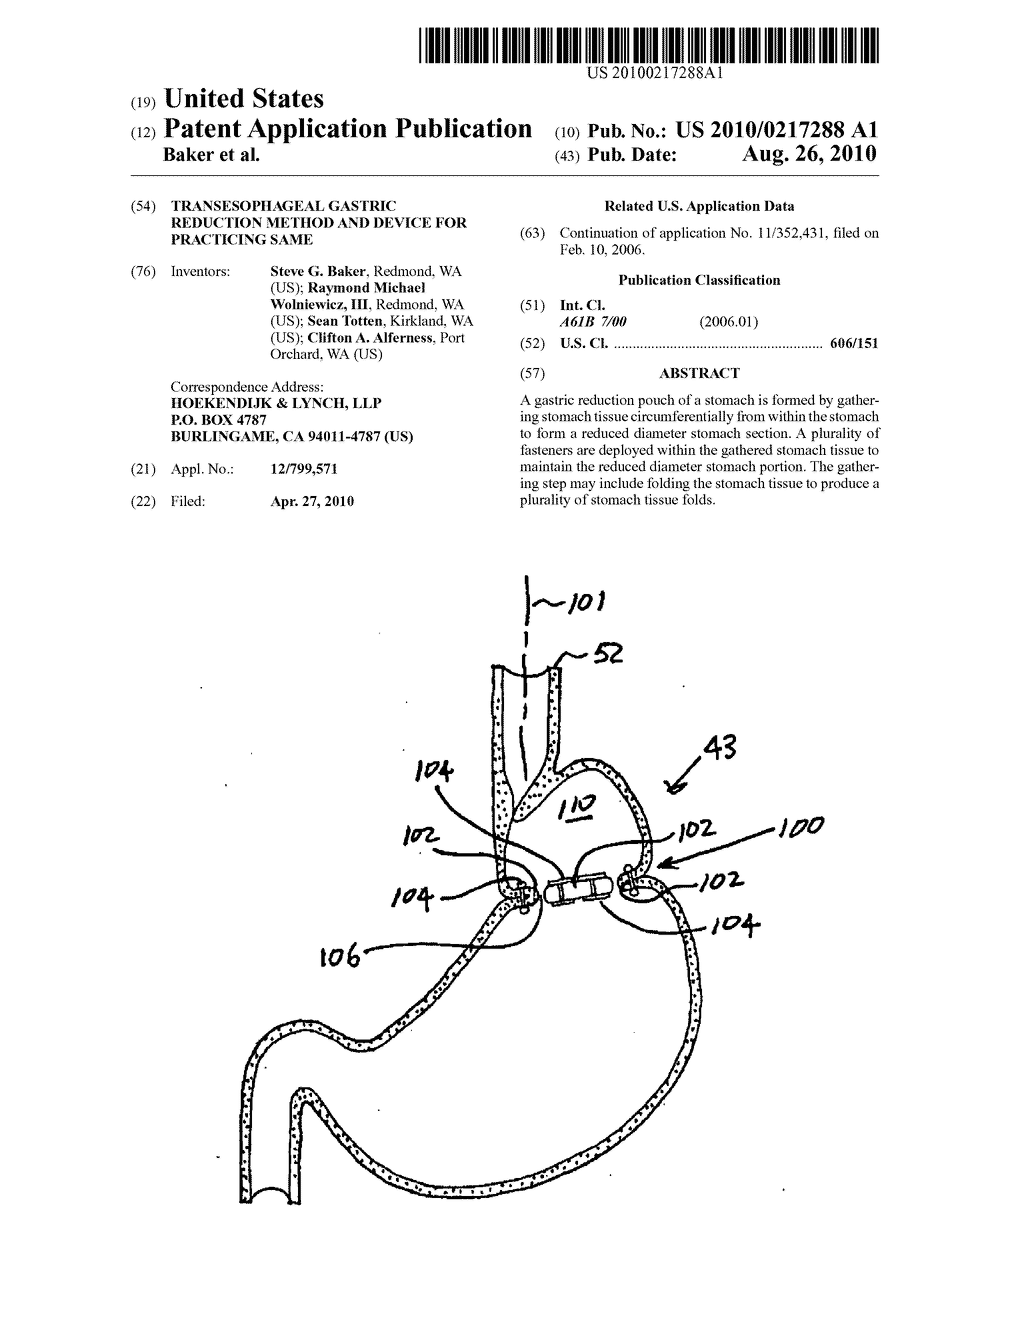 Transesophageal gastric reduction method and device for practicing same - diagram, schematic, and image 01